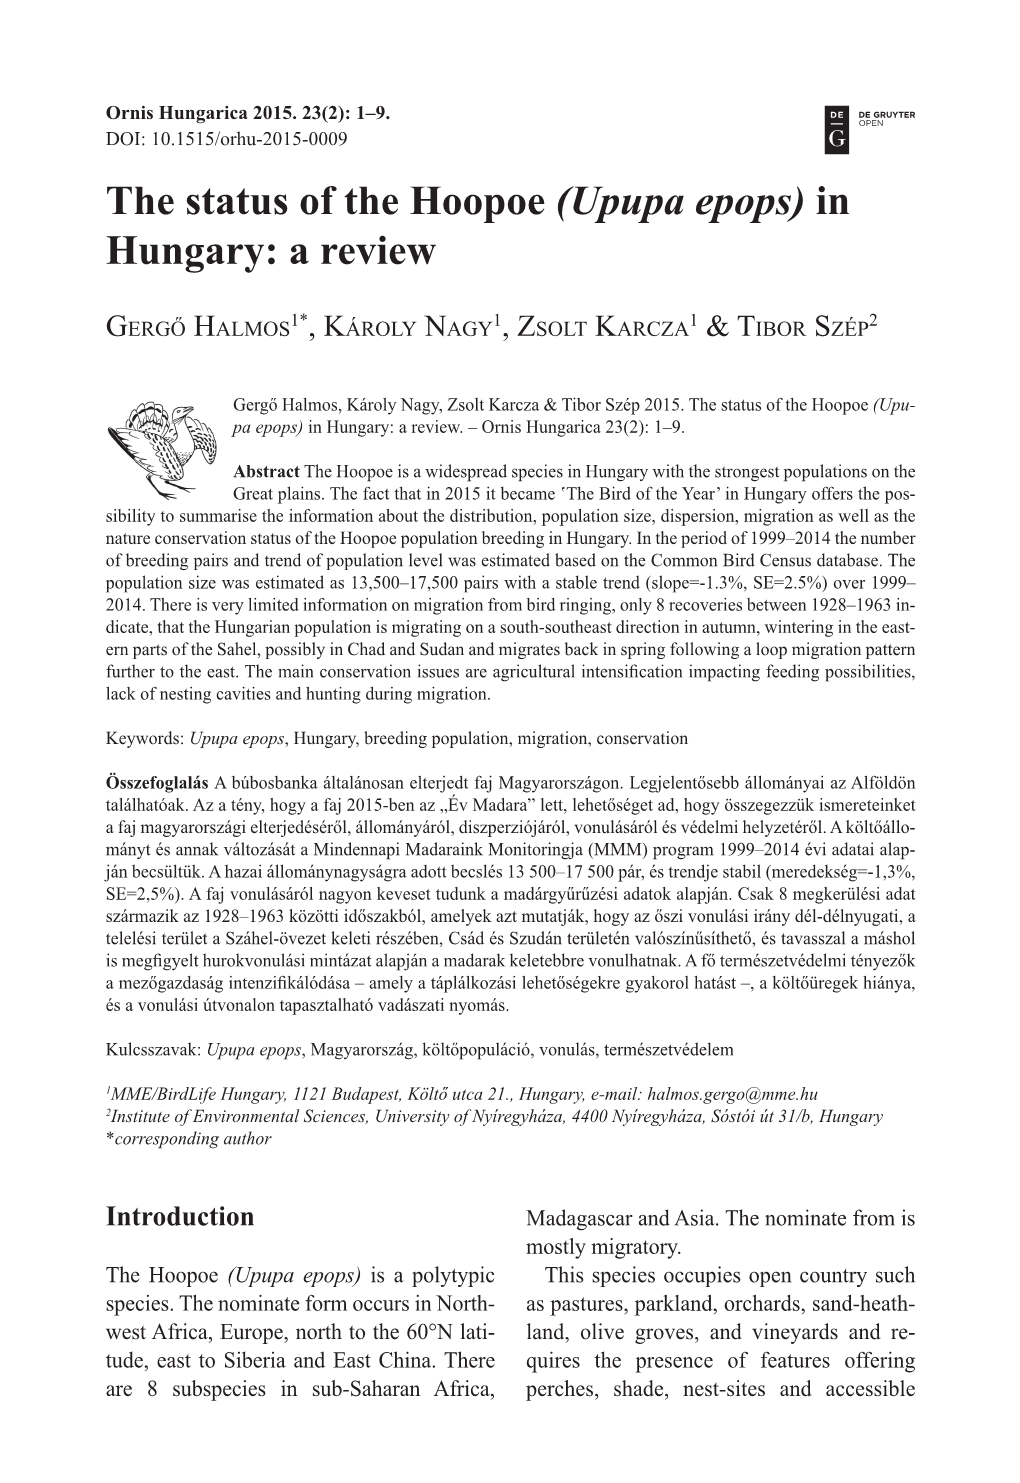 The Status of the Hoopoe (Upupa Epops) in Hungary: a Review